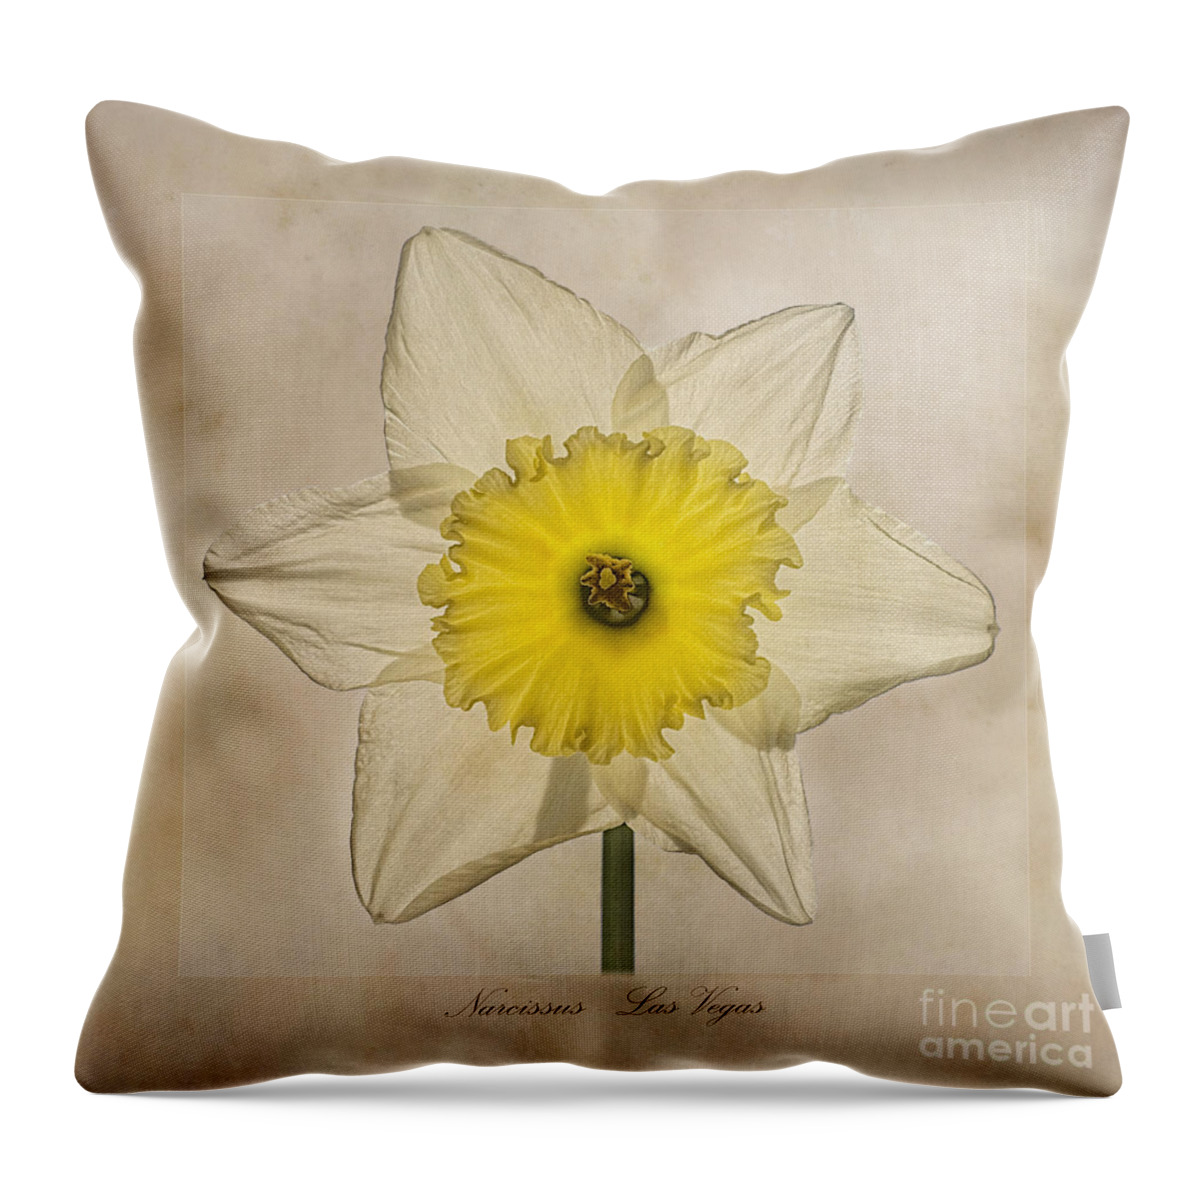 Daffodil - Las Vegas Throw Pillow featuring the photograph Narcissus Las Vegas by John Edwards